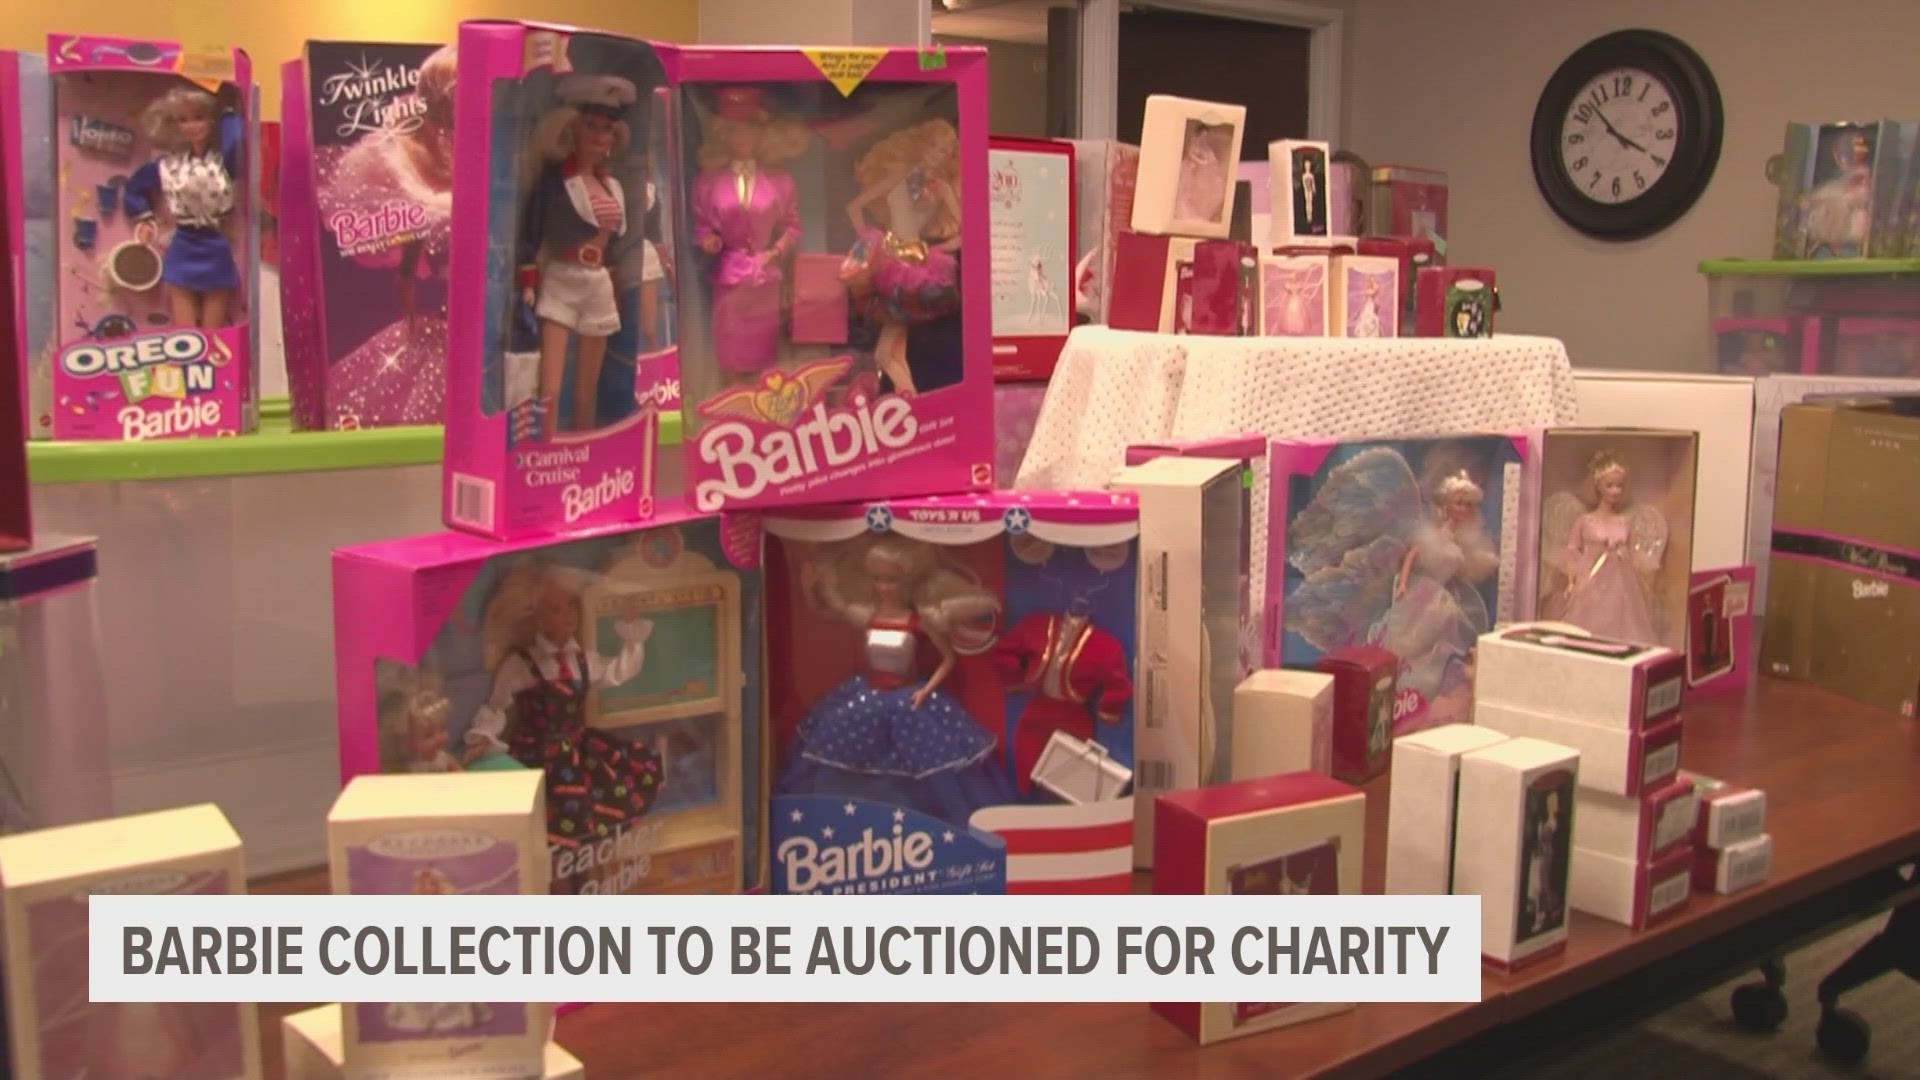 Nearly 30 years after the nonprofit first opened its doors to them, the Wyatt family donated a Barbie collection to the Ronald McDonald House to be auctioned.